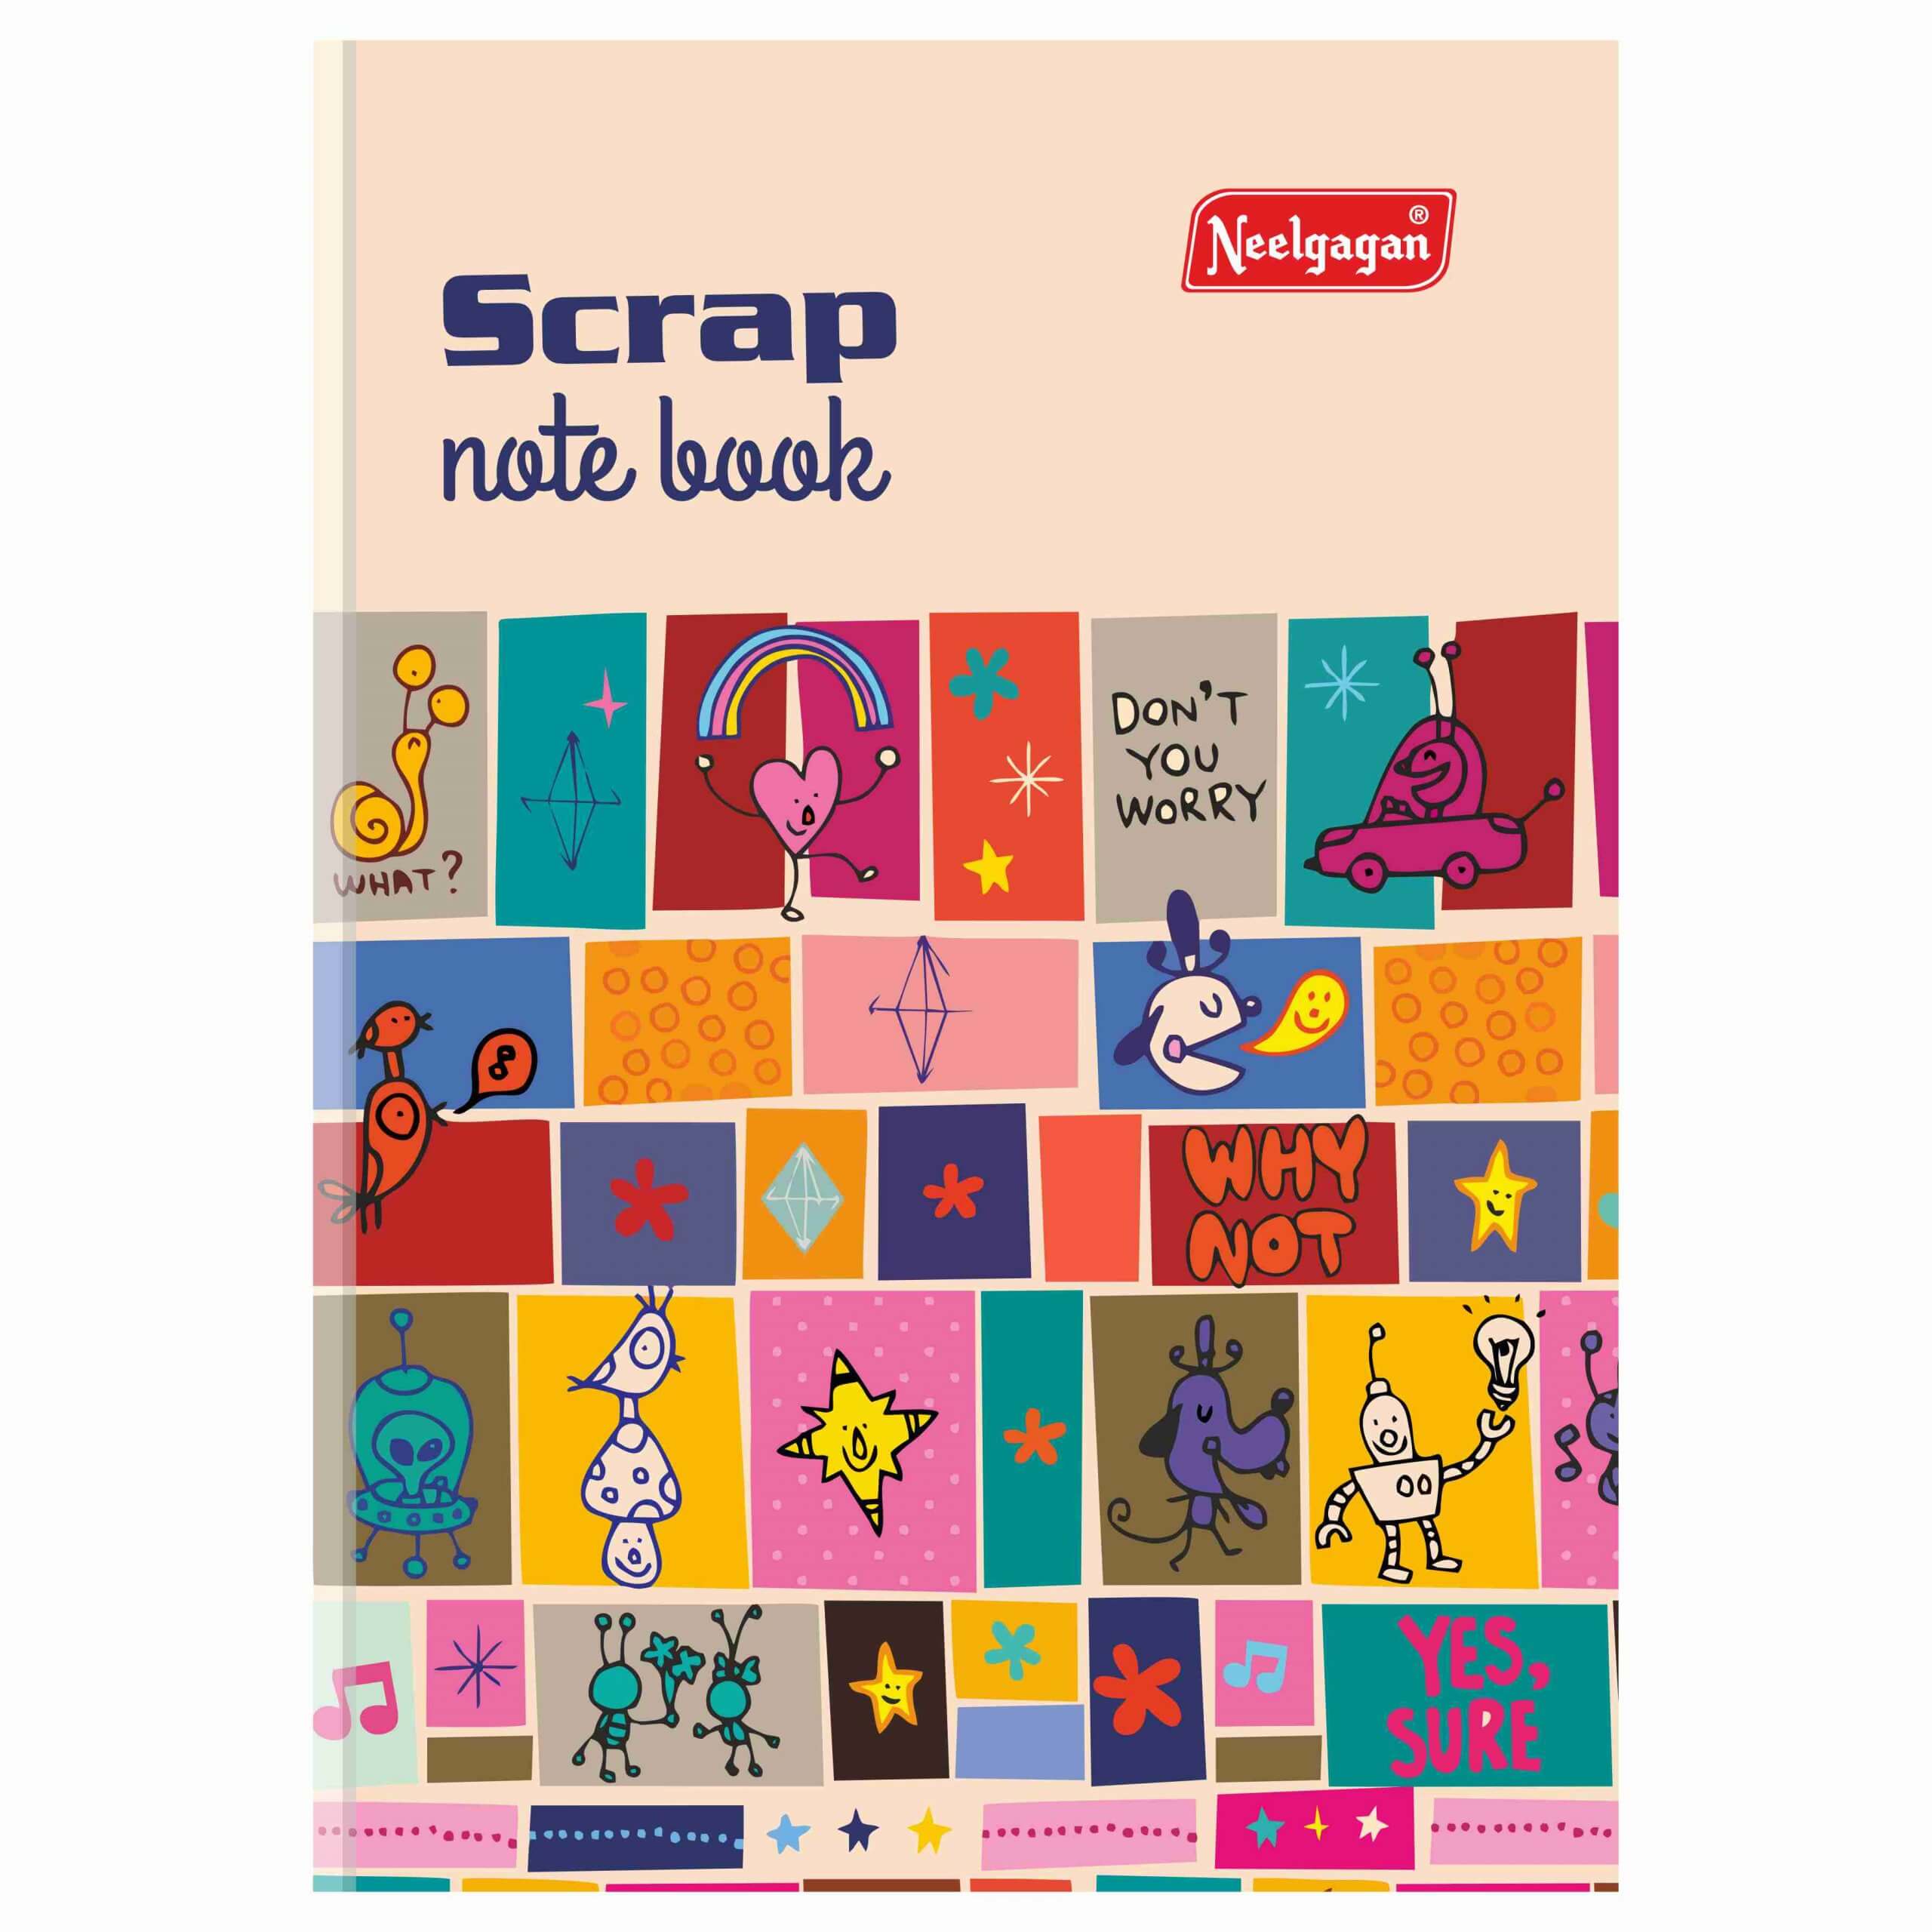 Scrap Notebook A4 Coloured Pages (21cm X 29.7cm) Softcover